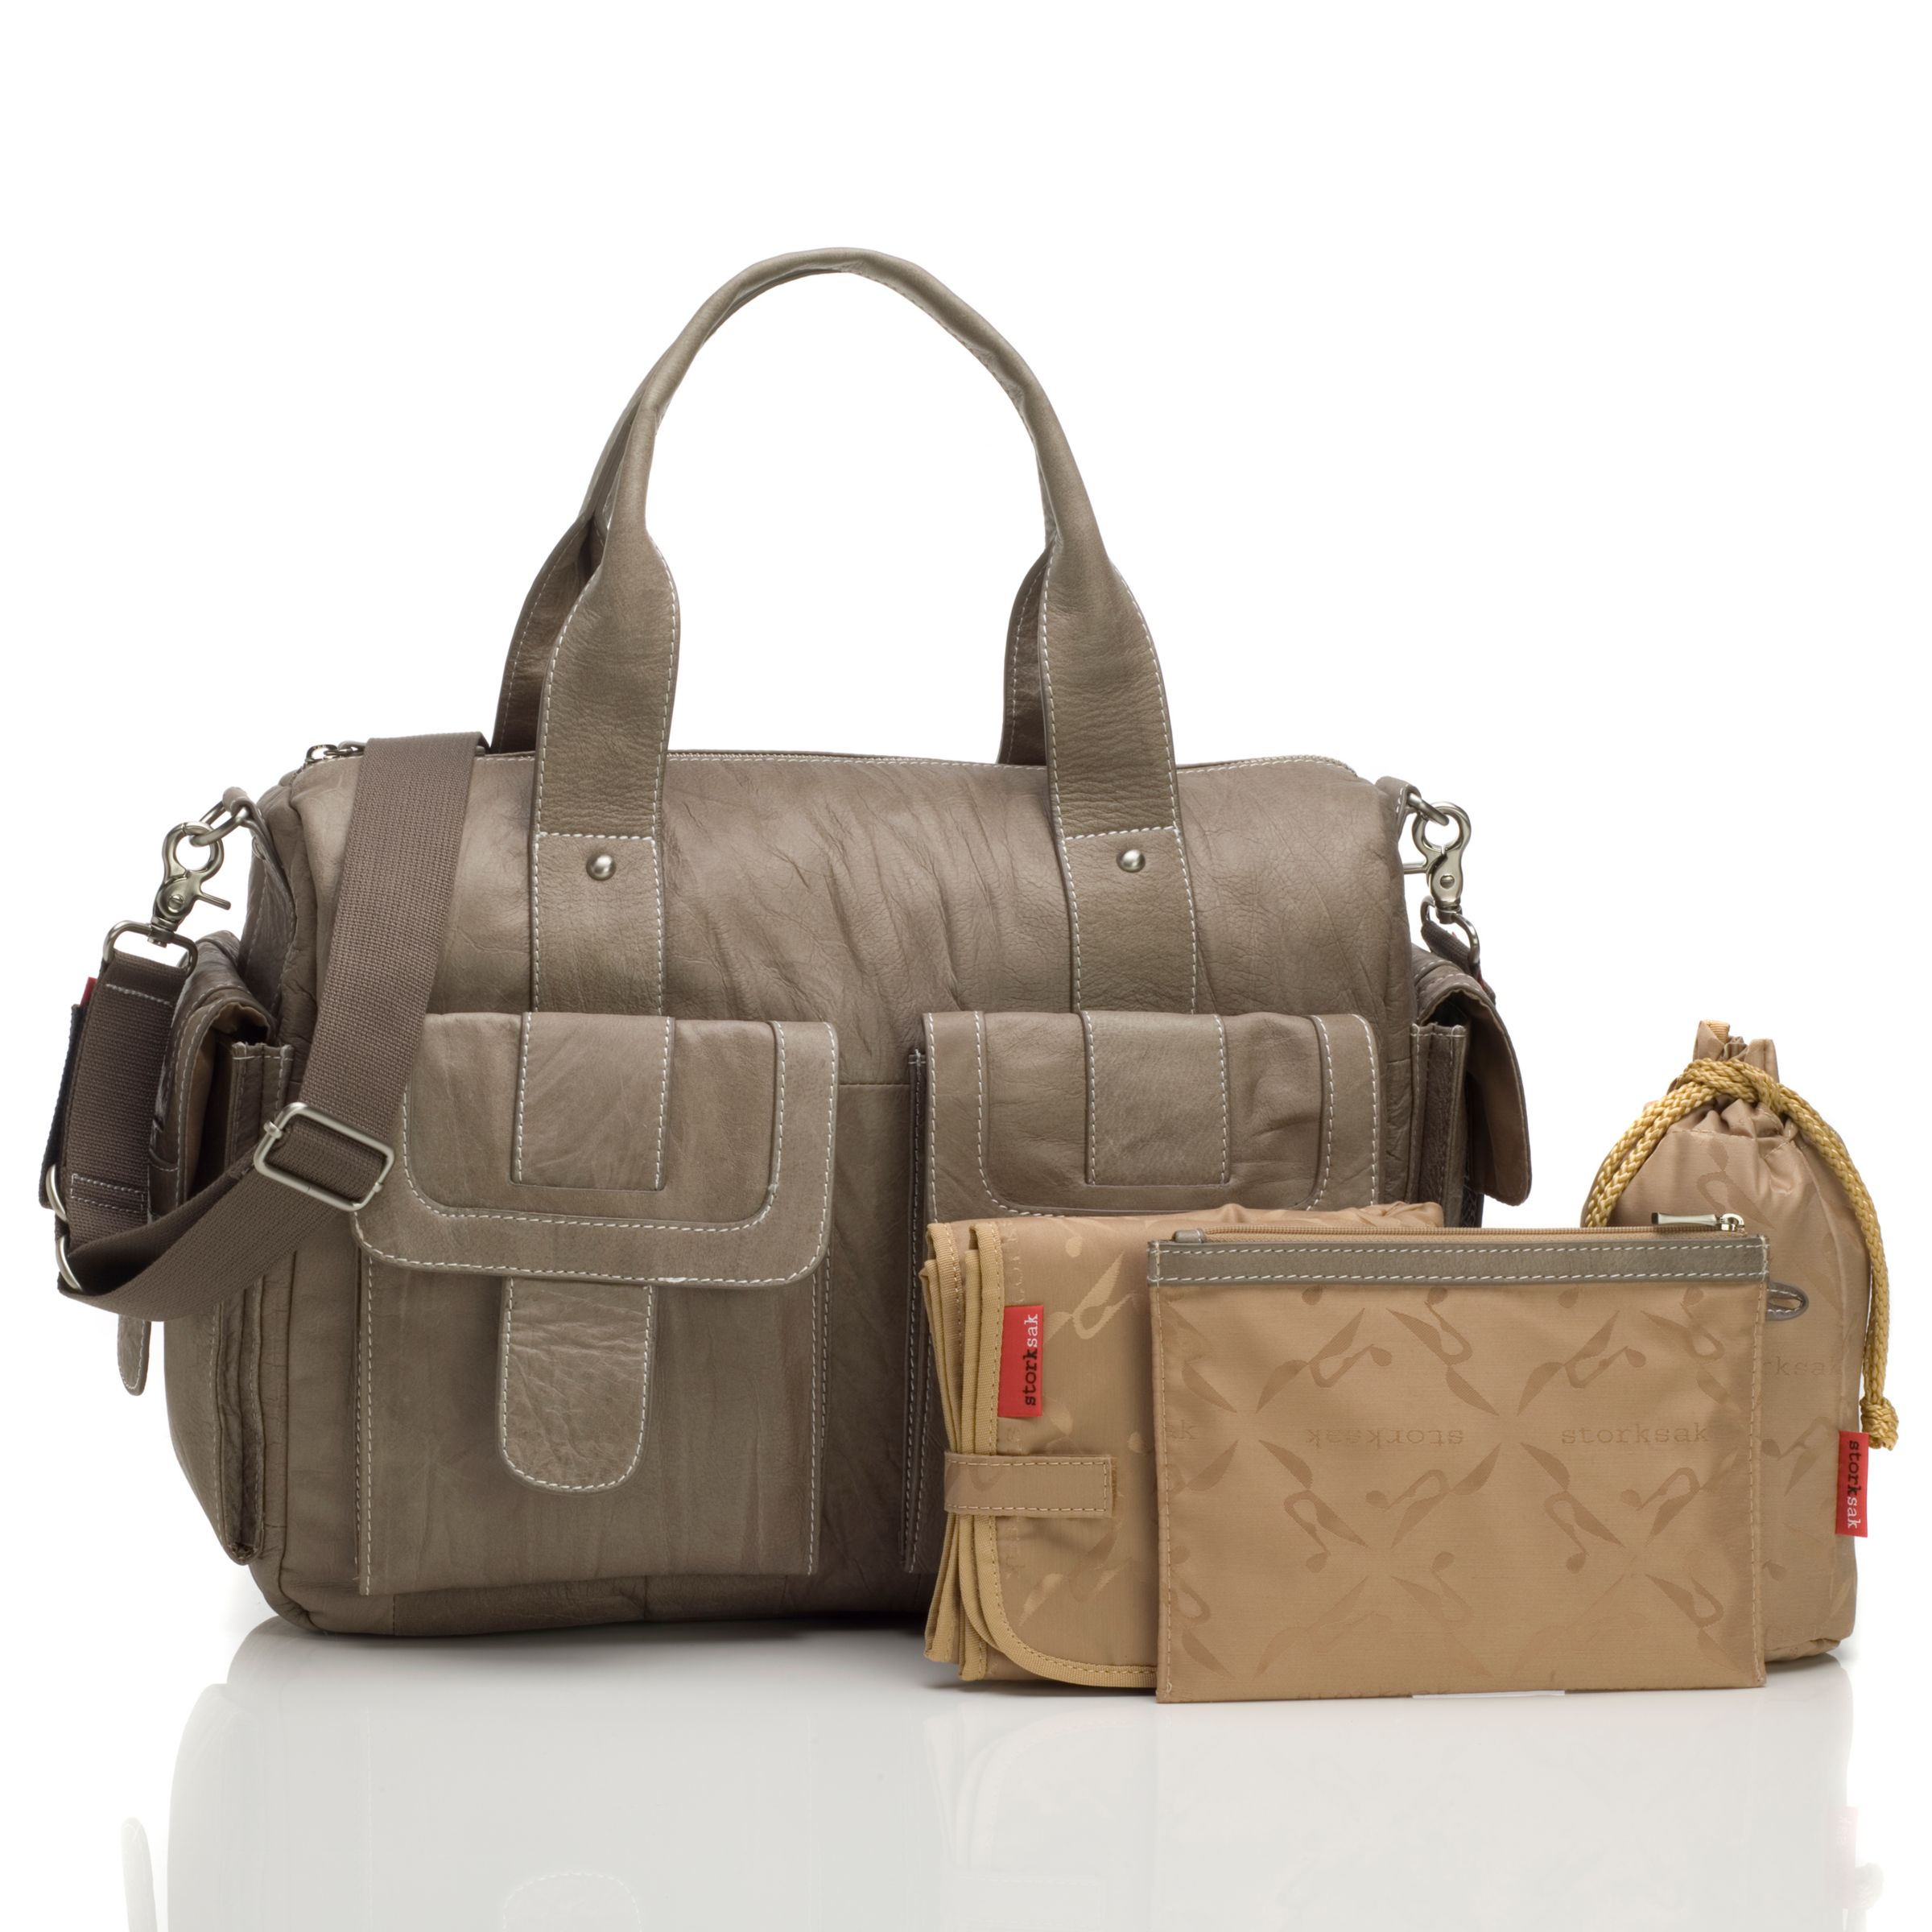 Storksak Sofia Leather Baby Changing Bag, Taupe at John Lewis & Partners